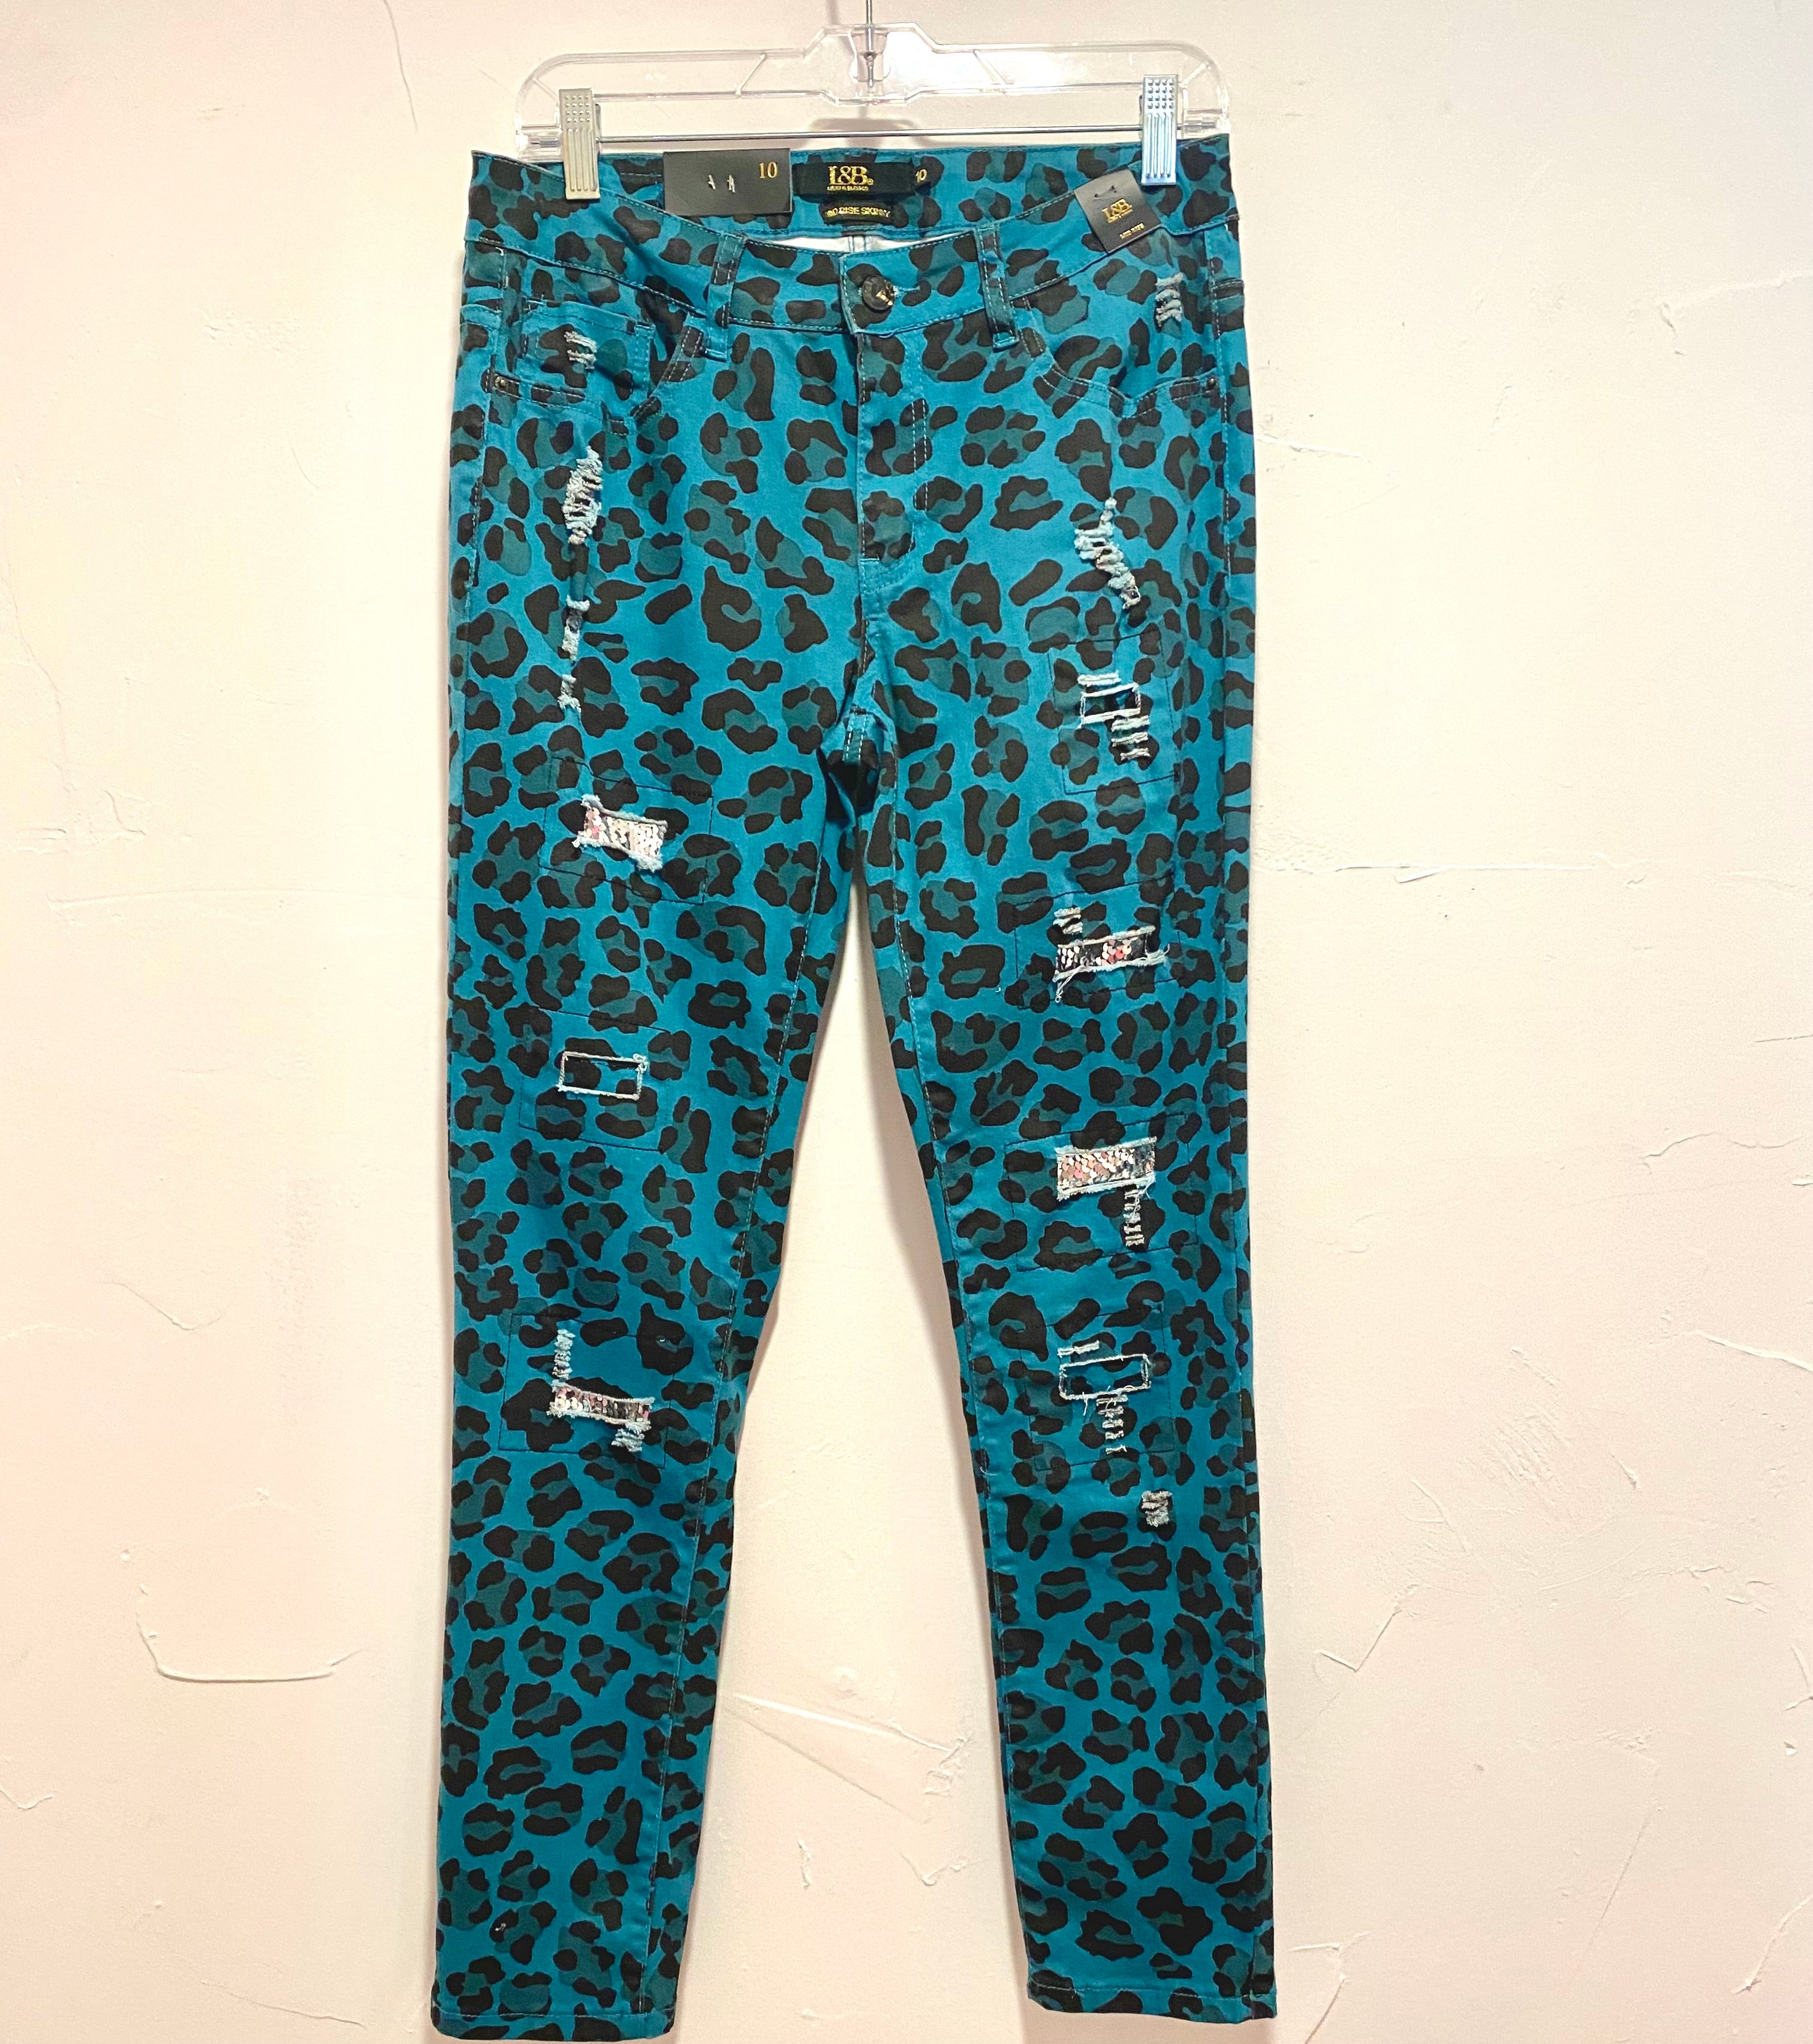 Teal leopard jeans with sequin patch